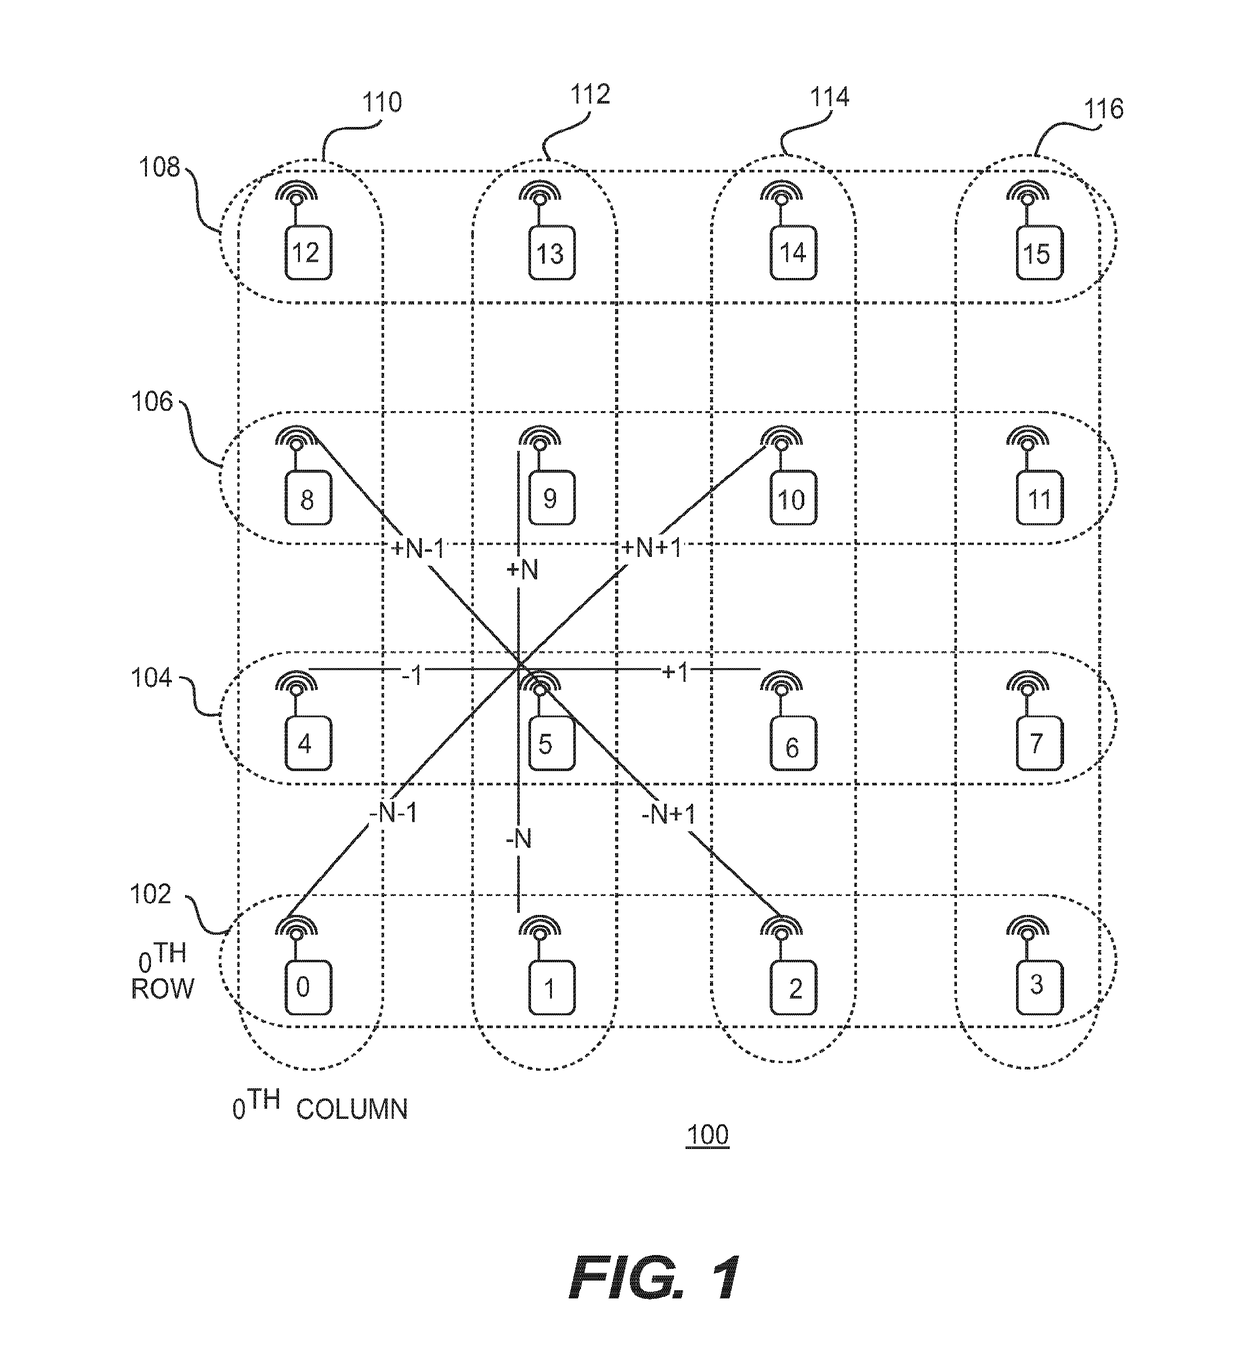 Id-based routing protocol for wireless network with a grid topology